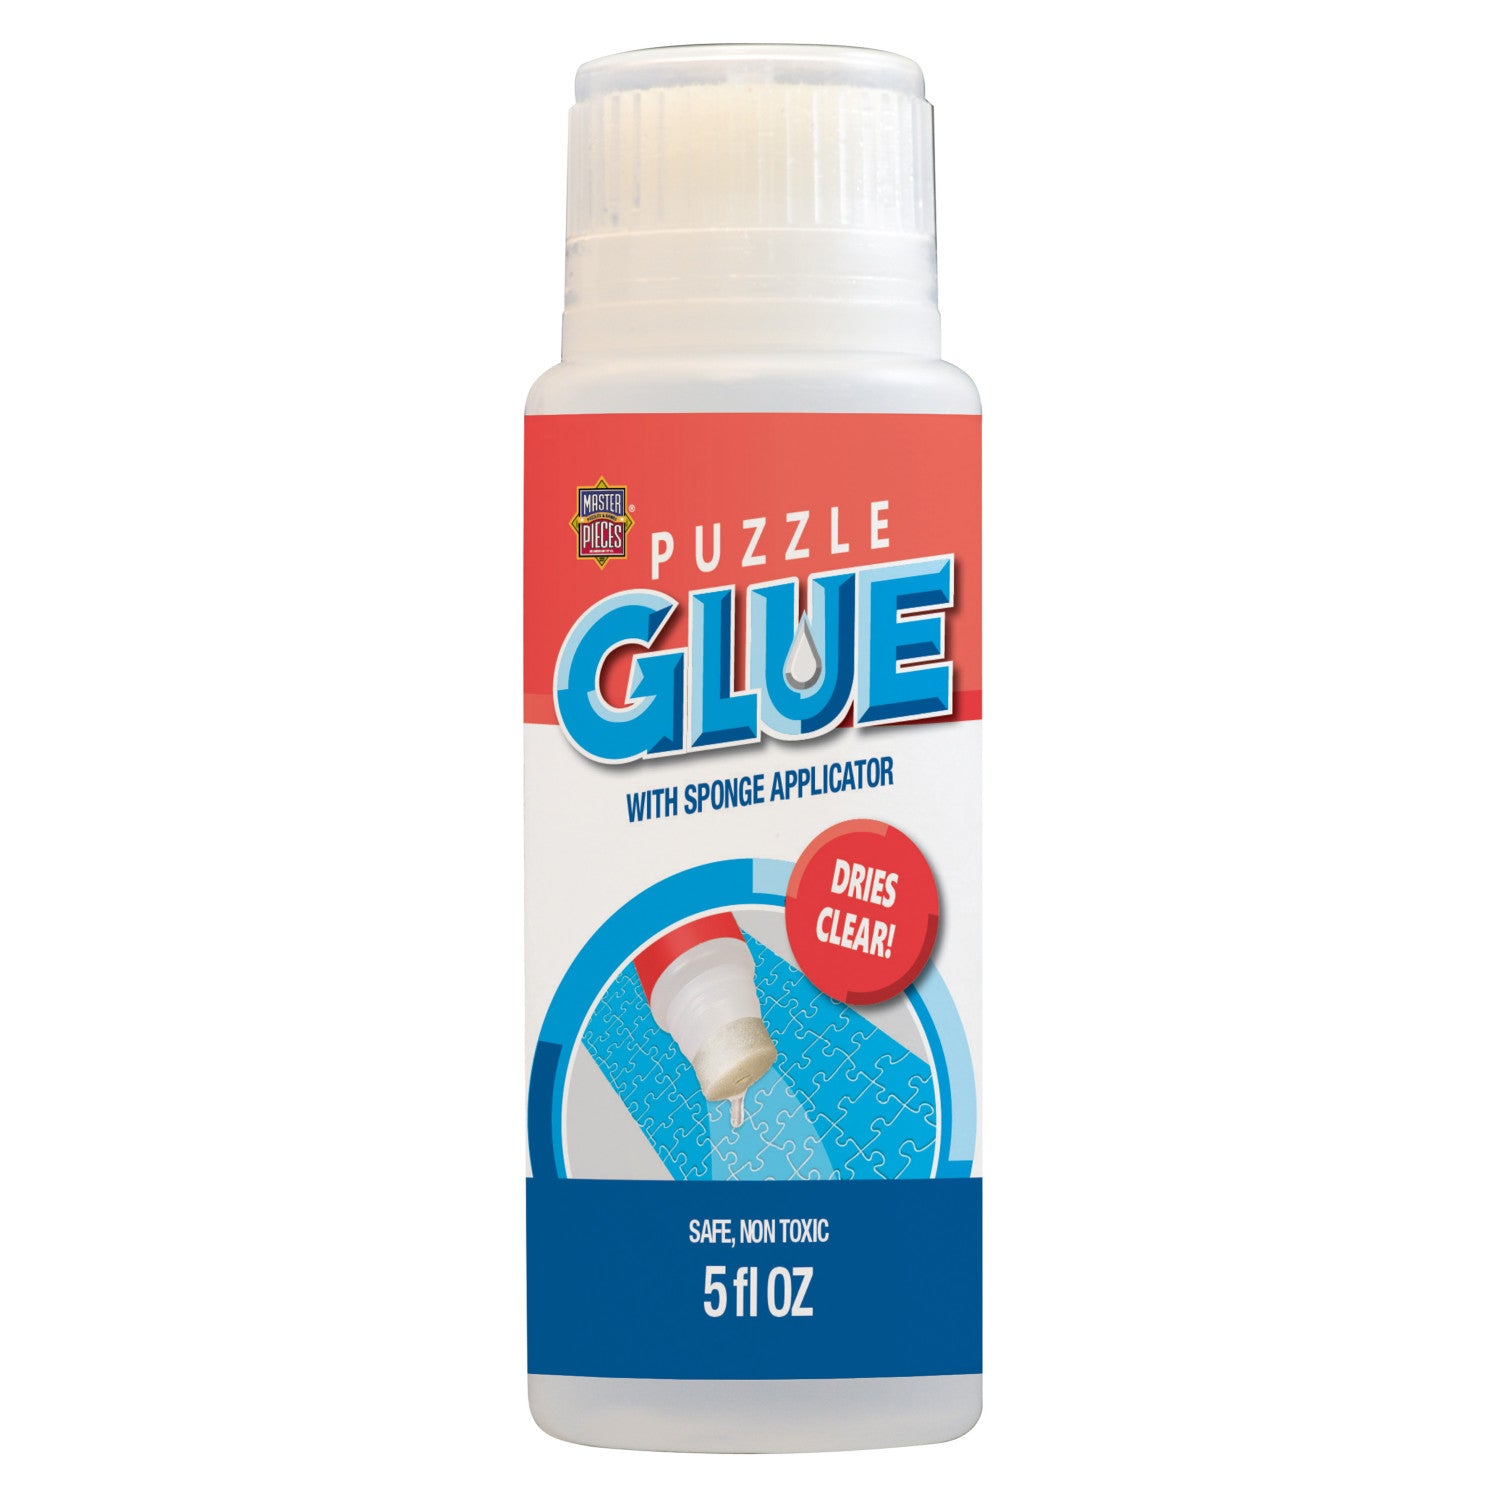 MasterPieces - Puzzle Glue with Sponge Applicator, 5oz - Clear, 1 unit -  Fry's Food Stores